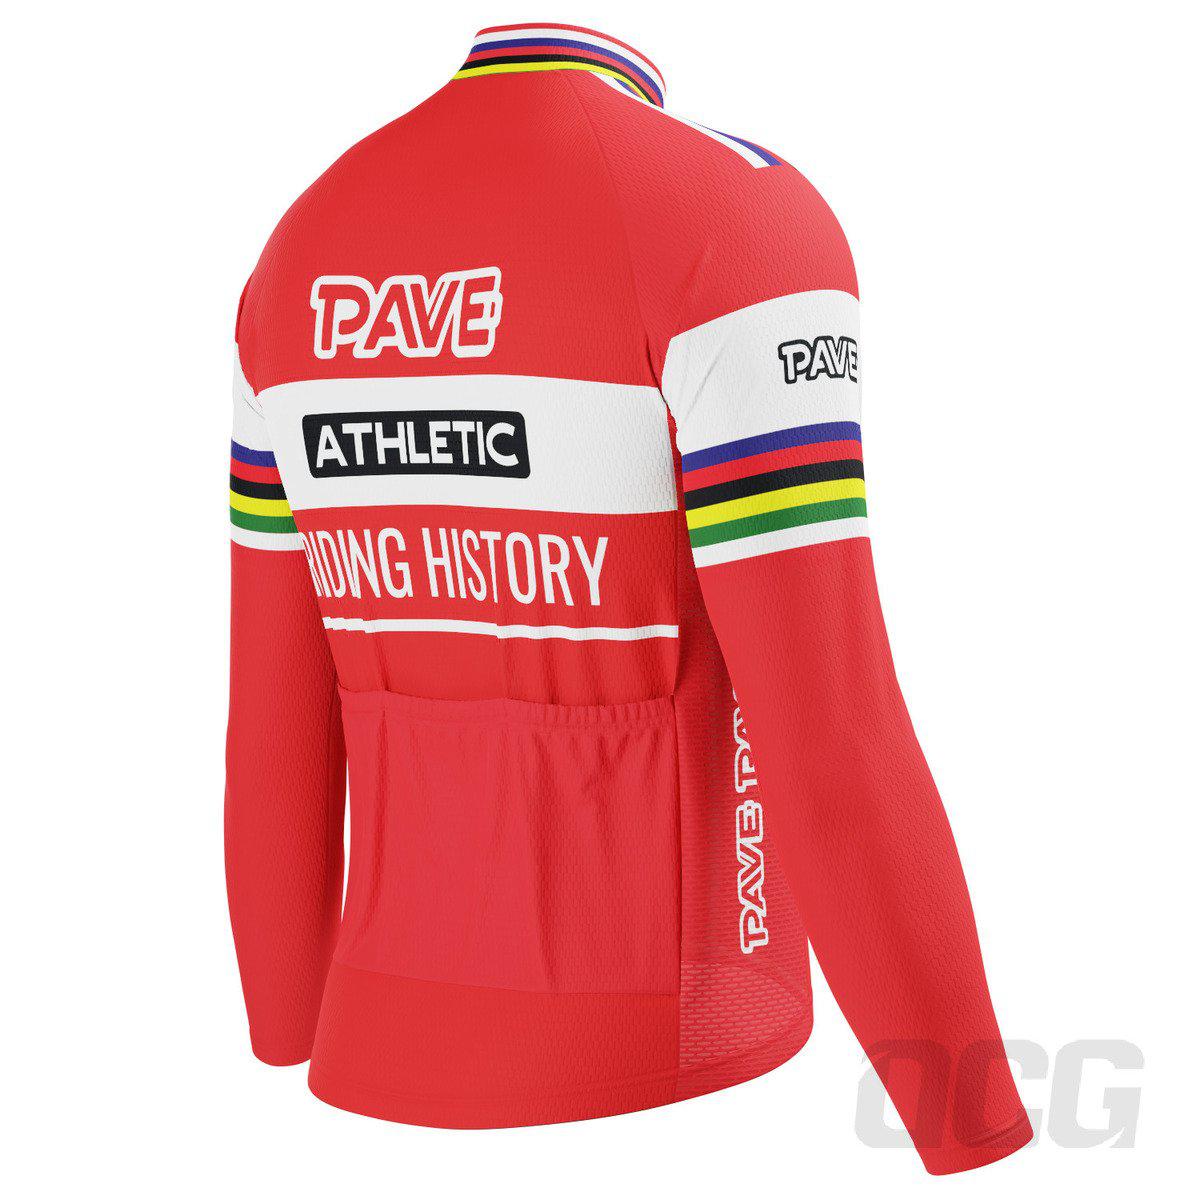 Men's PAVE Athletic Flanders Long Sleeve Cycling Jersey